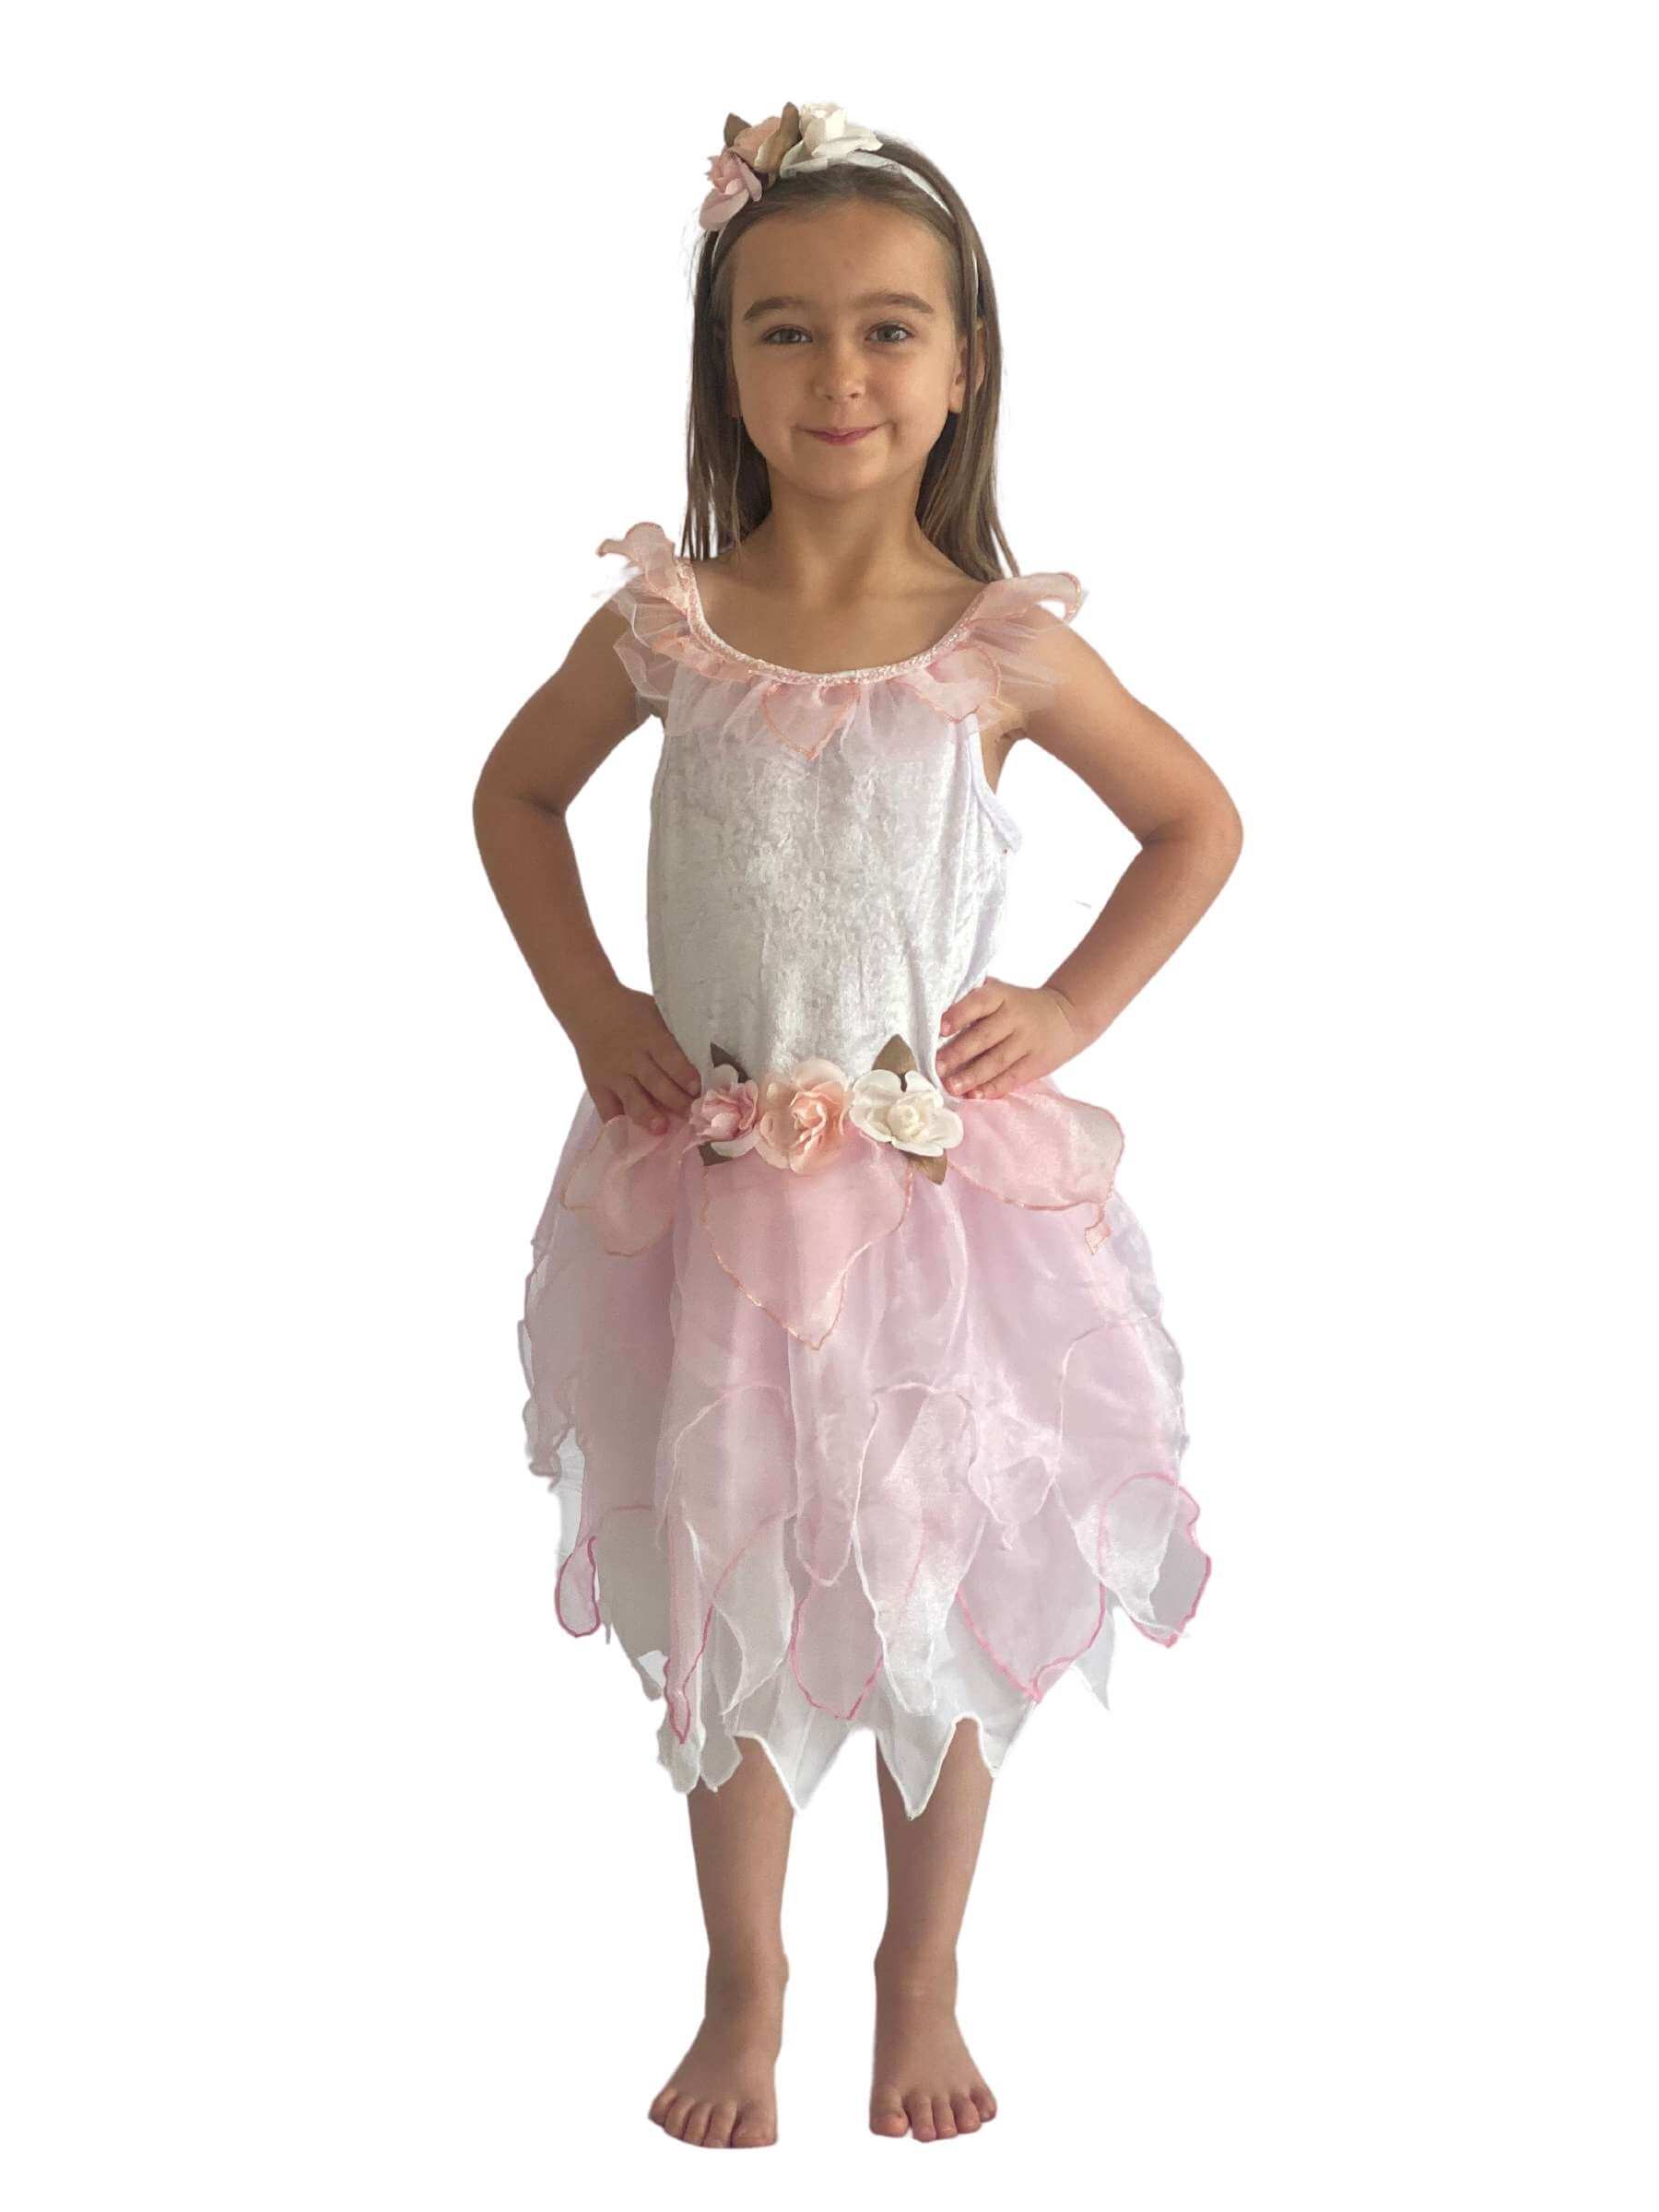 Girl with her hands on her hips wearing a white fairy costume with pink layered skirt, flower detail to the wait and a headband with flowers on.